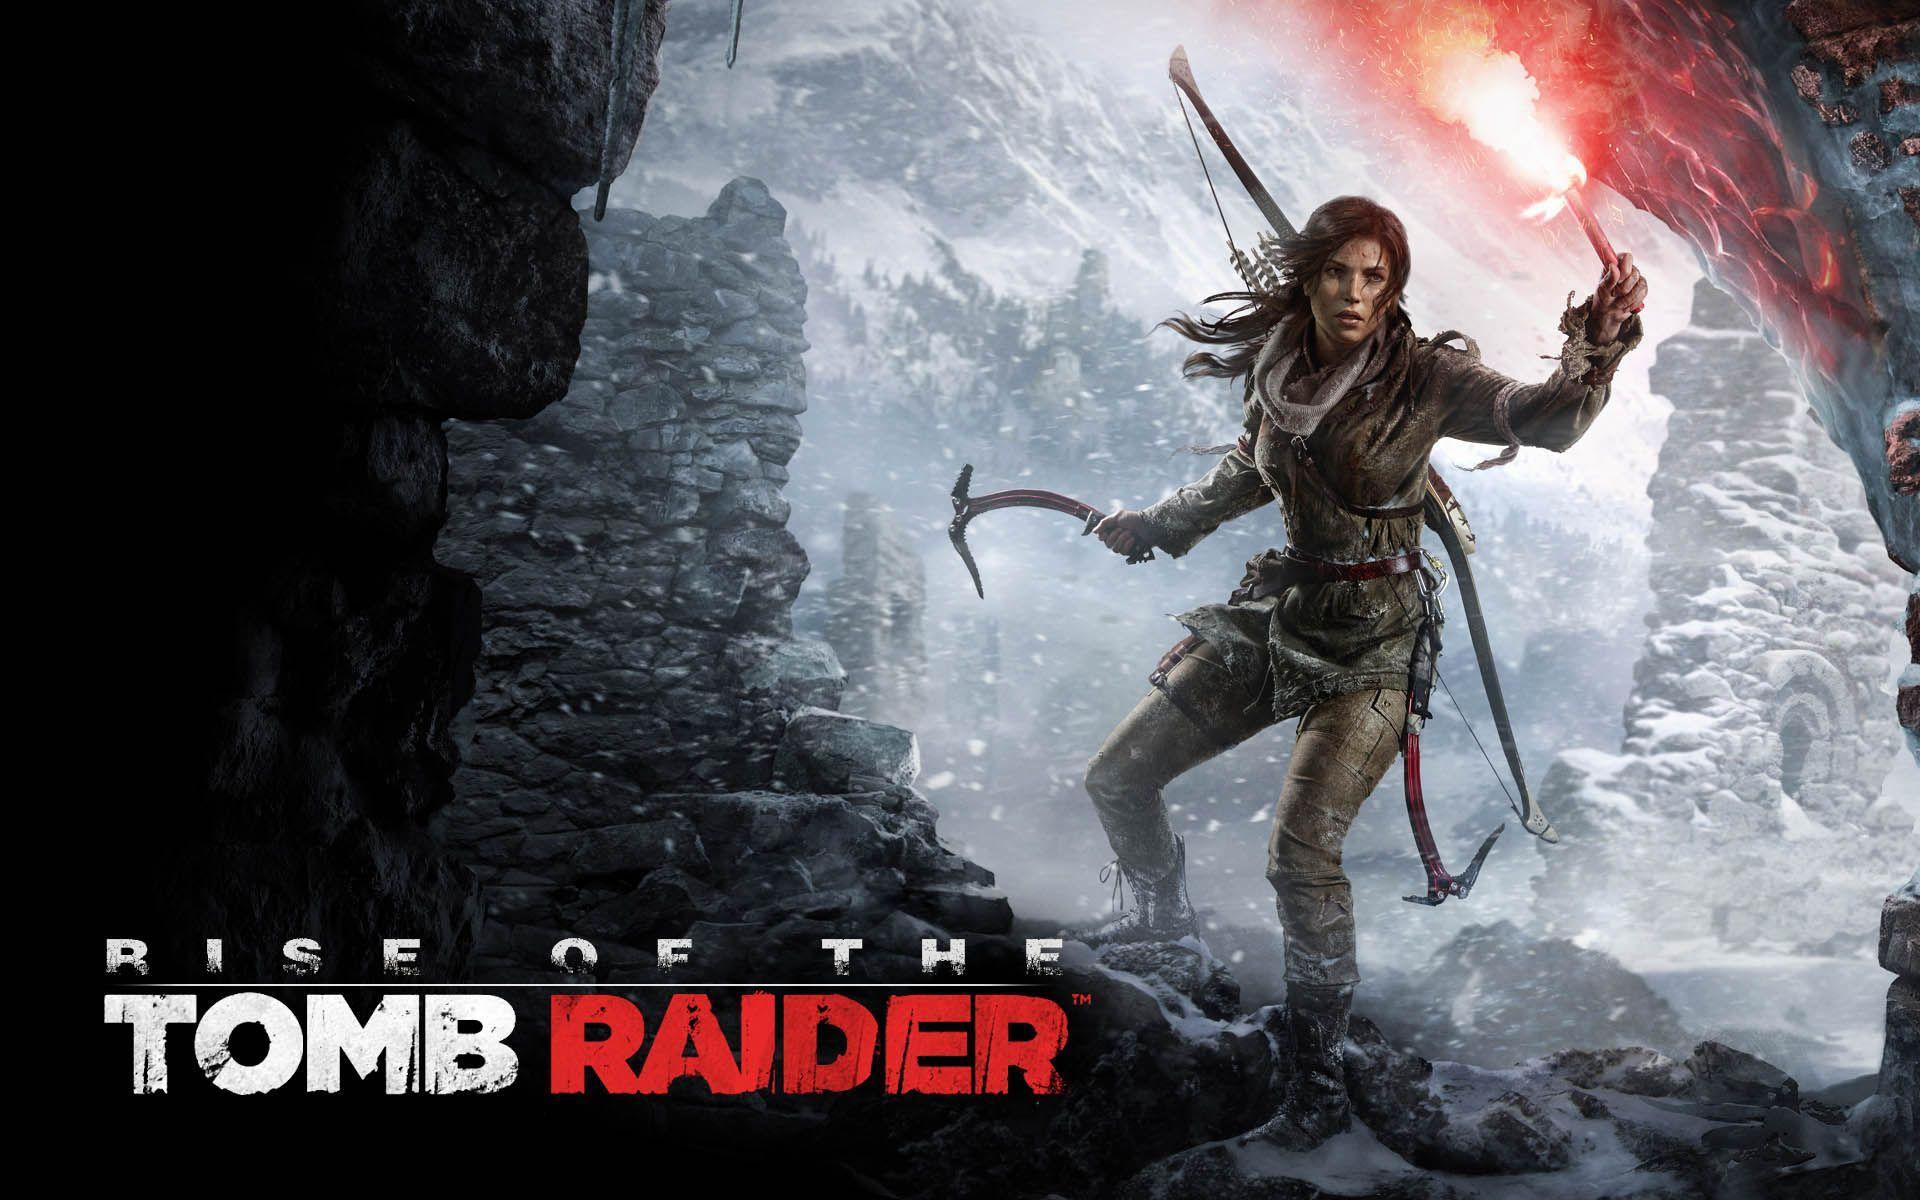 16 Quality Tomb Raider Wallpapers, Video Games